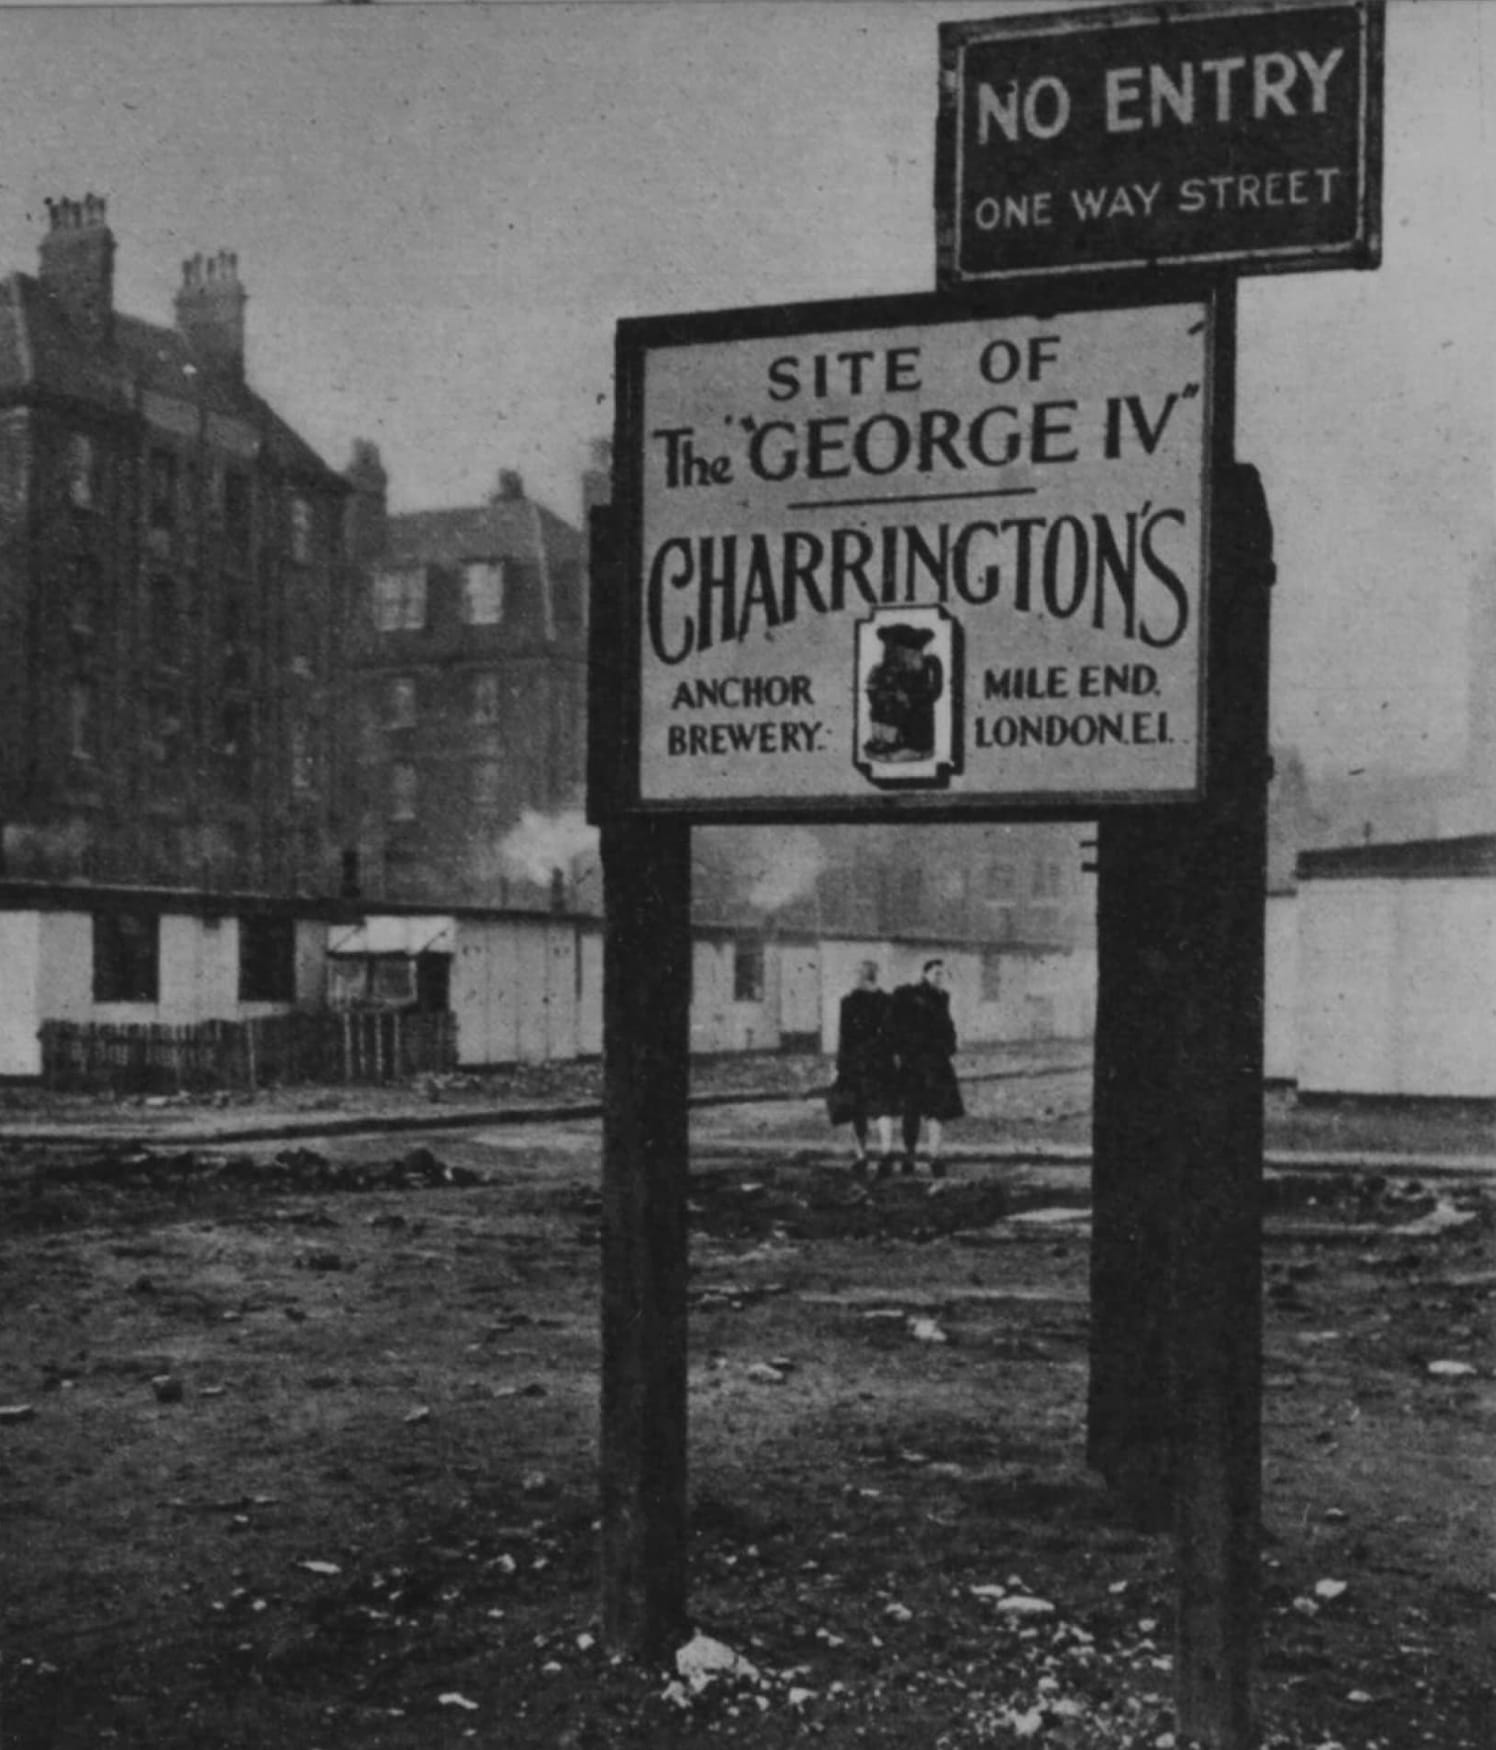 A sign post on flat land with buildings behind it. There are two signs, one above the other. The uppermost reads "No Entry. Once Way Street", while the one below says, "Site of the 'George IV'. Charrington's, Anchor Brewery, Mile End, London E1."